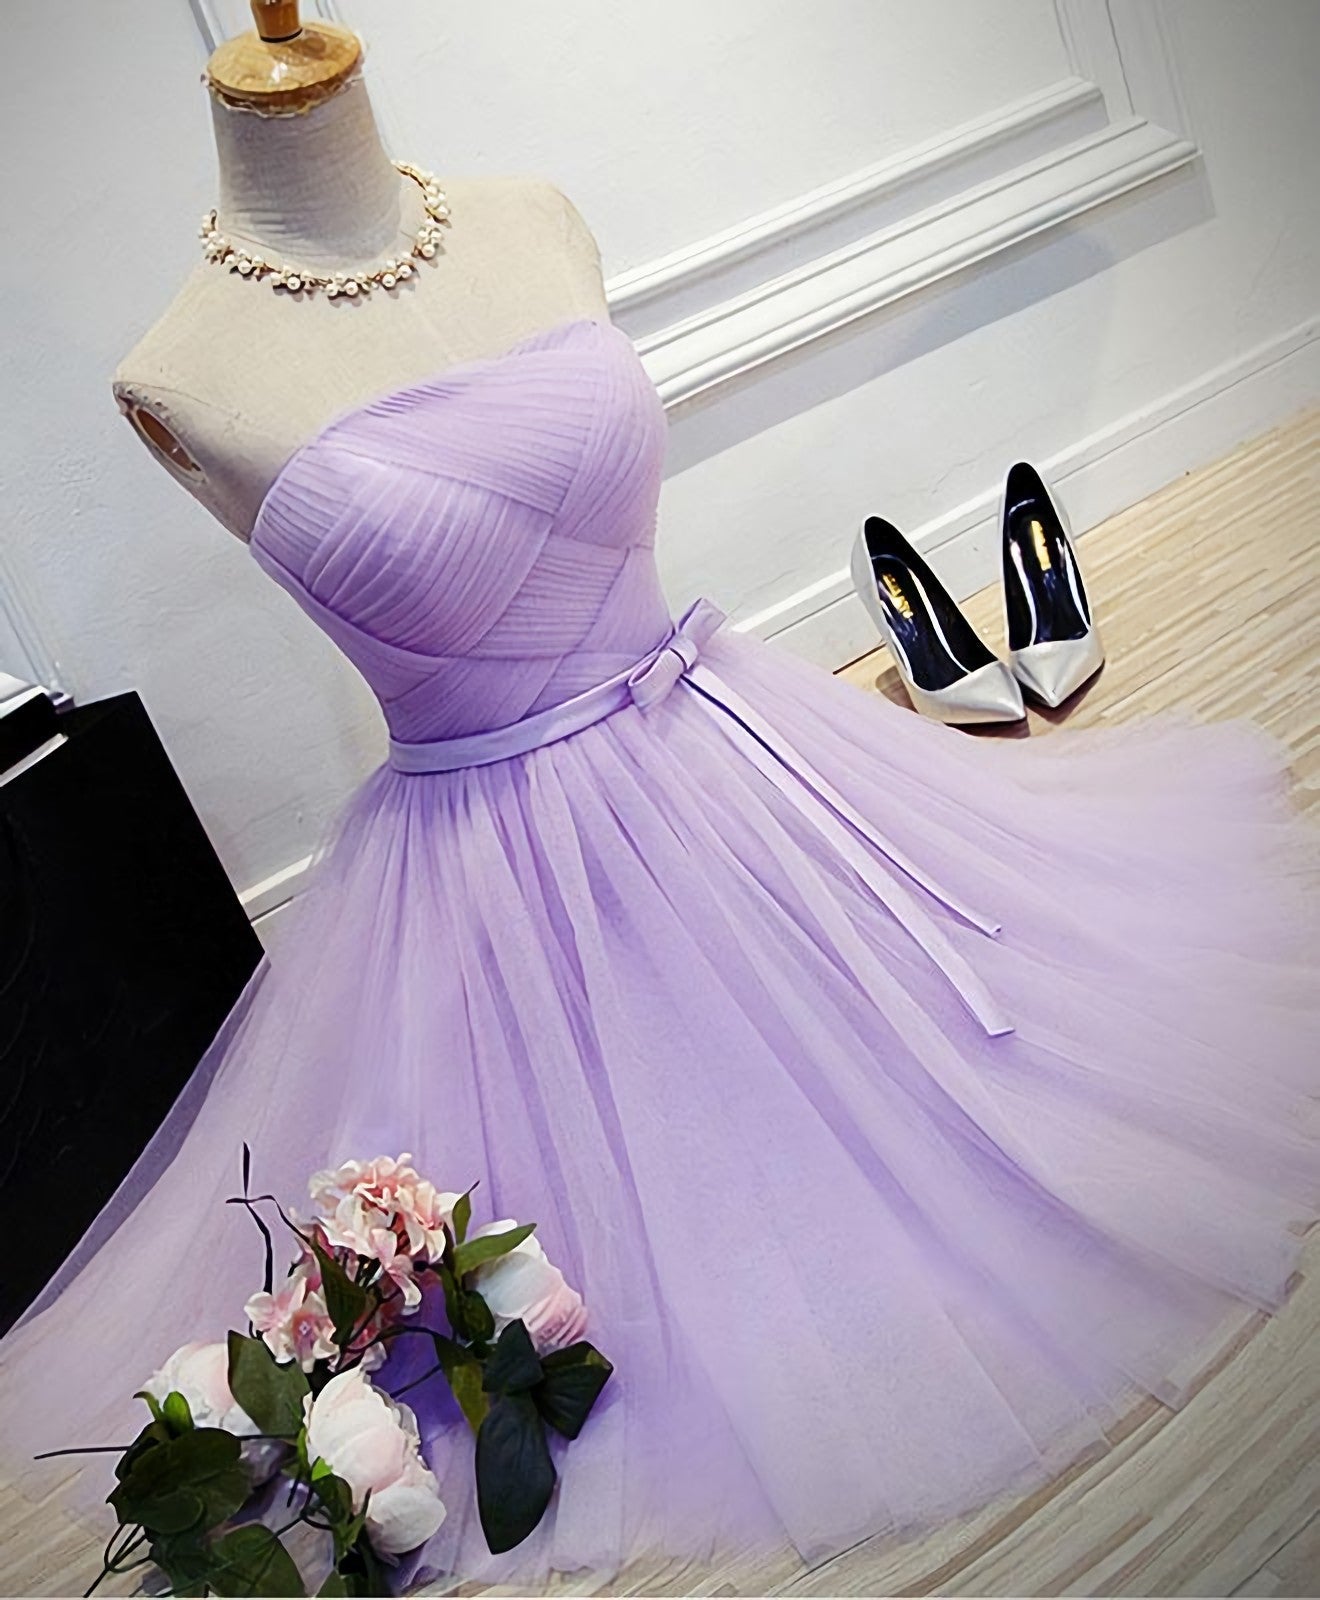 Cute A Line Tulle Short Corset Prom Dress, Corset Bridesmaid Dress outfit, Formal Dress With Embroidered Flowers